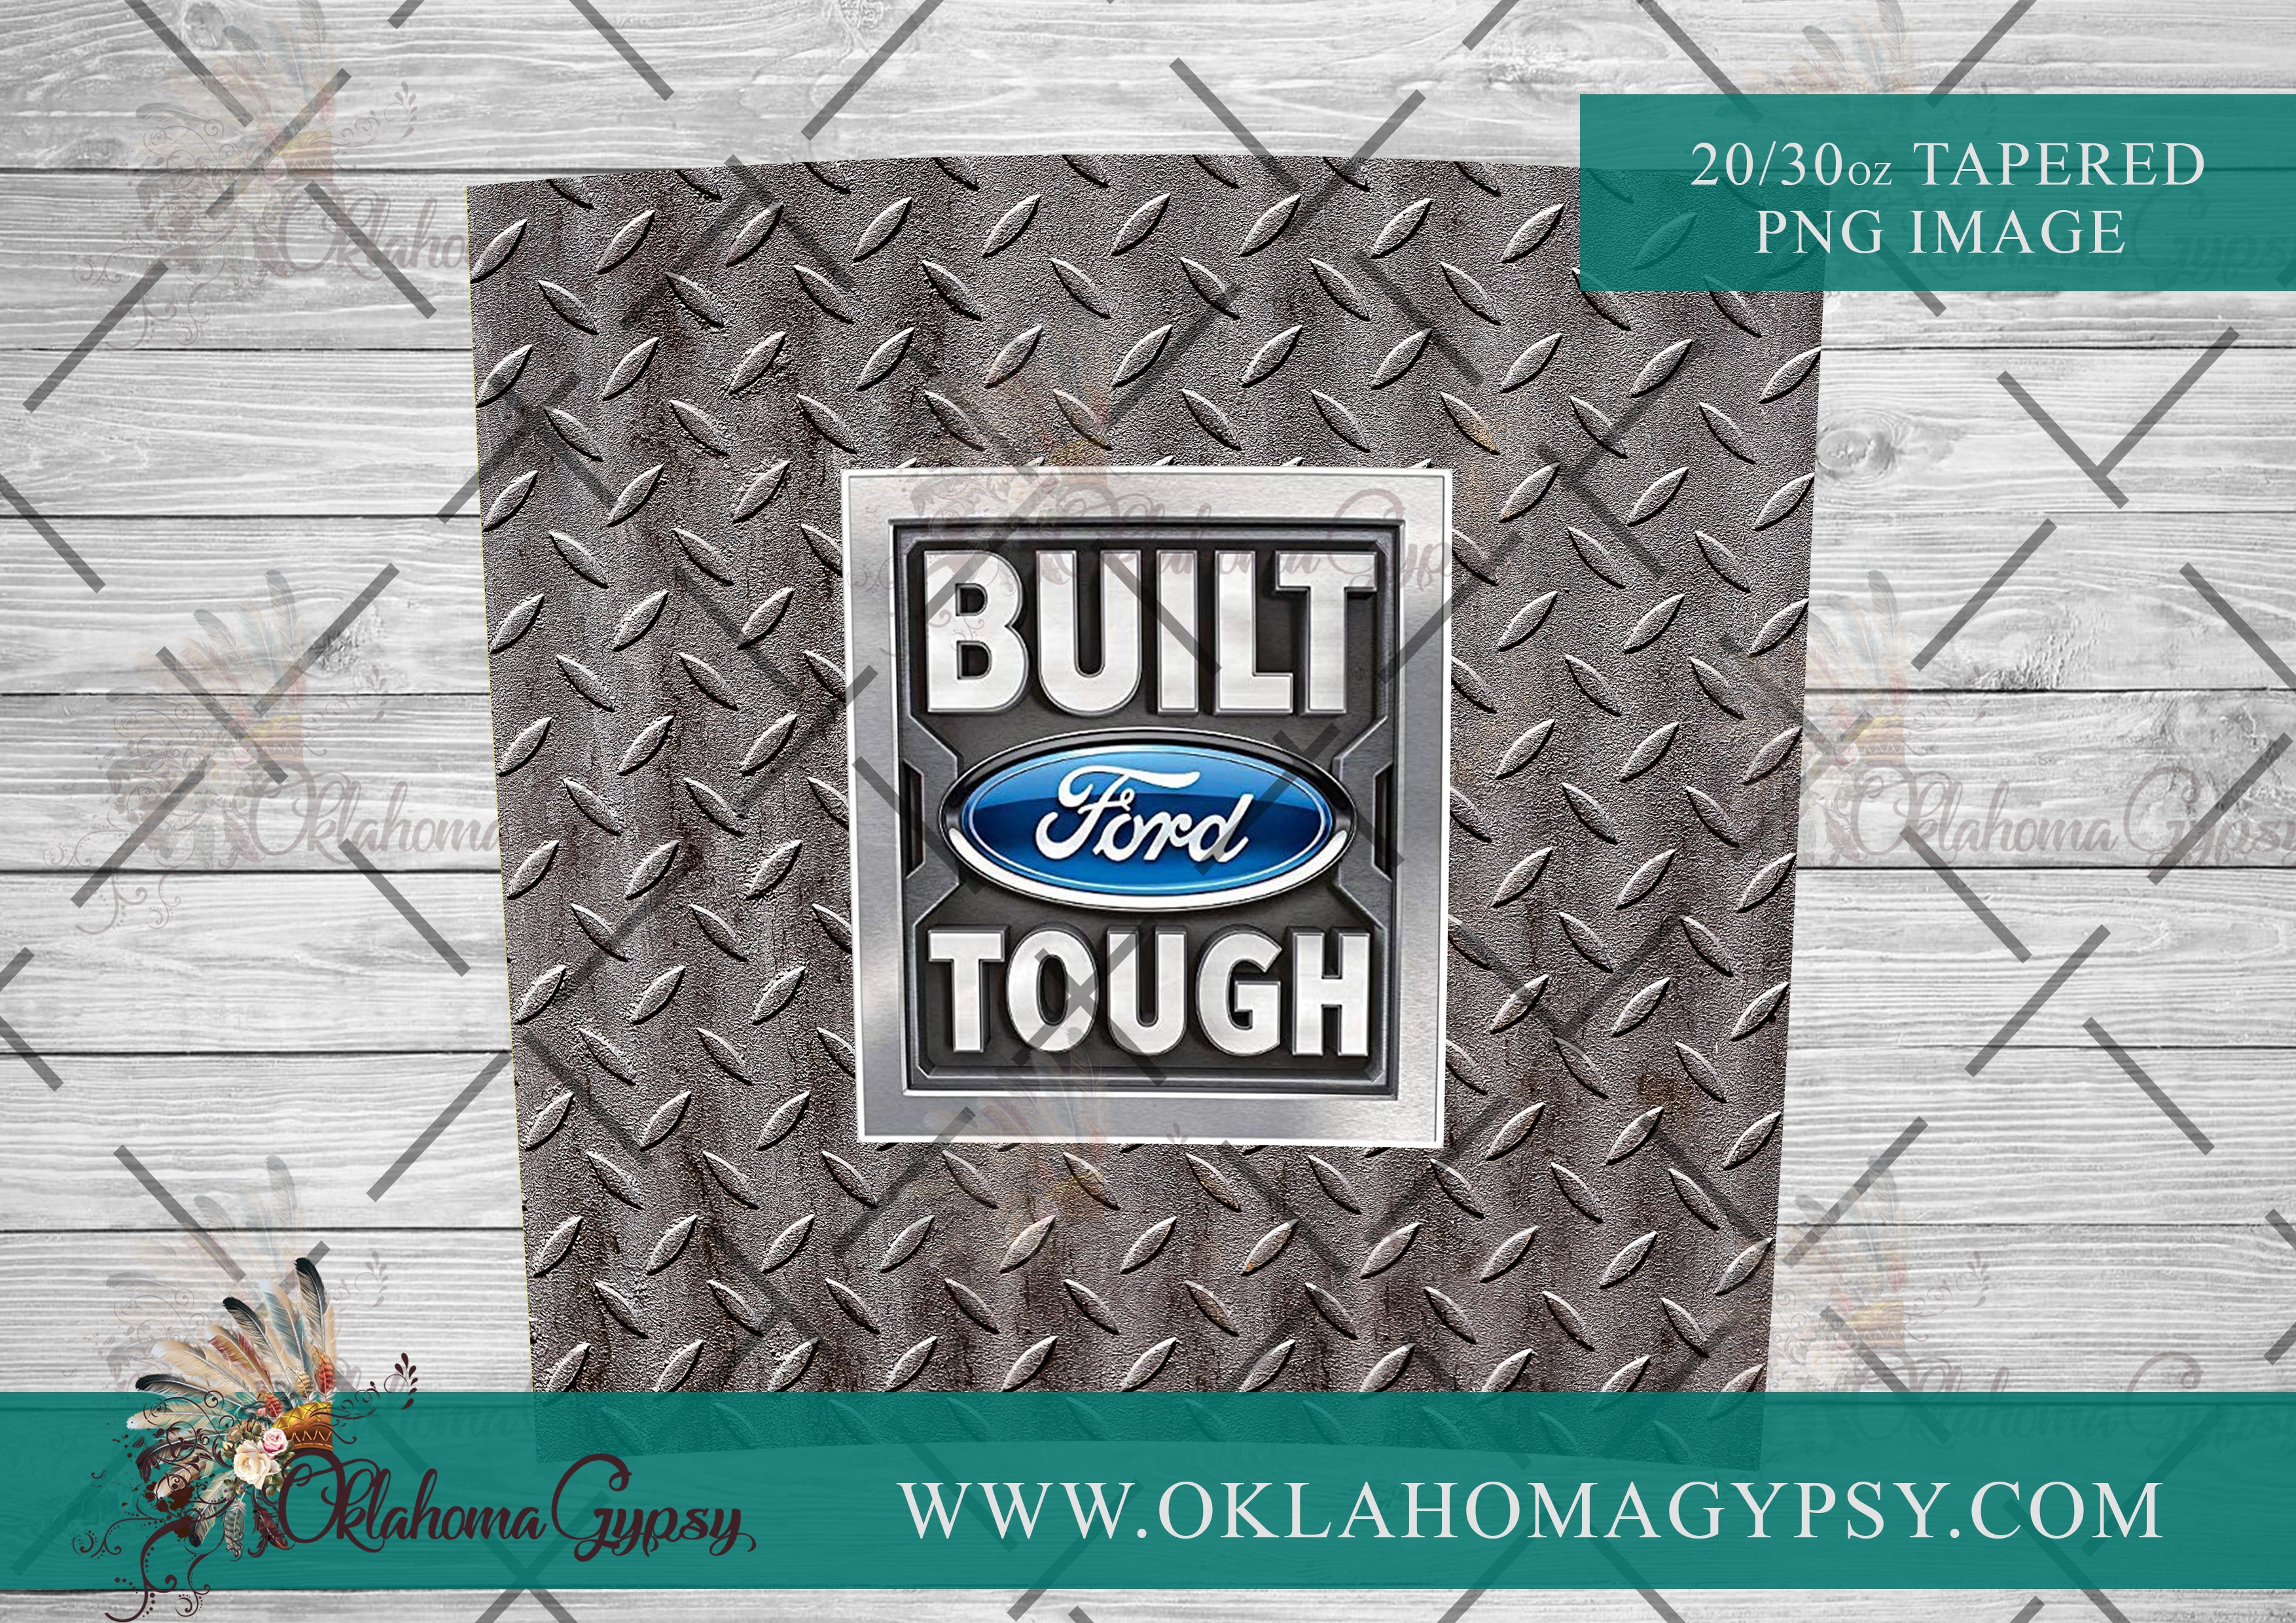 Built Ford Tough Rusted Metal Inspired Digital File – Oklahoma Gypsy Designs